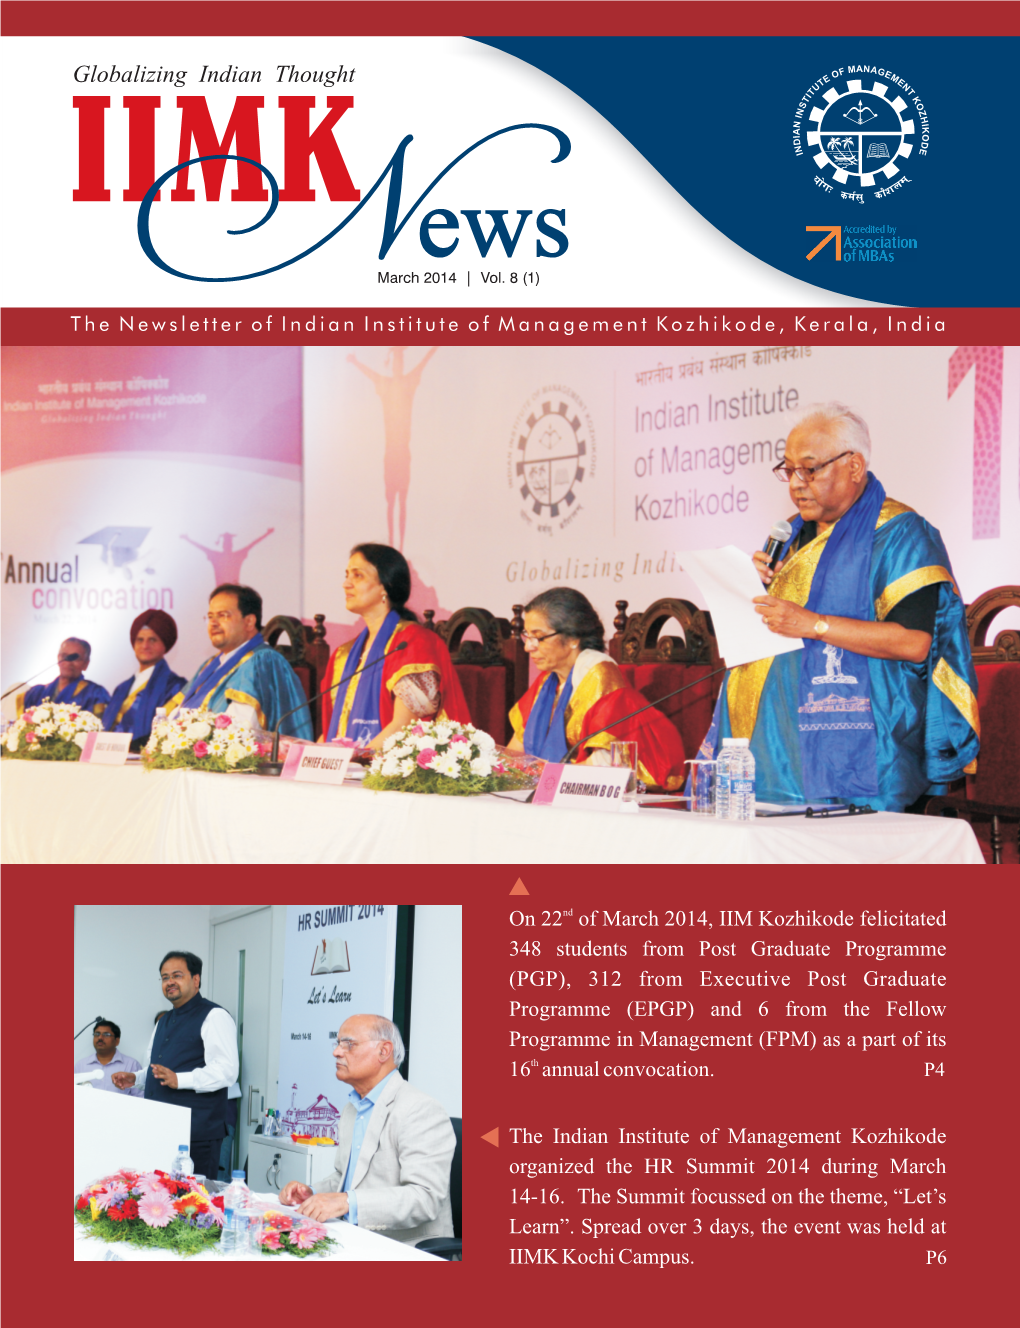 Iimk News March Issue 8(1) FINAL 6 May 14.Pmd